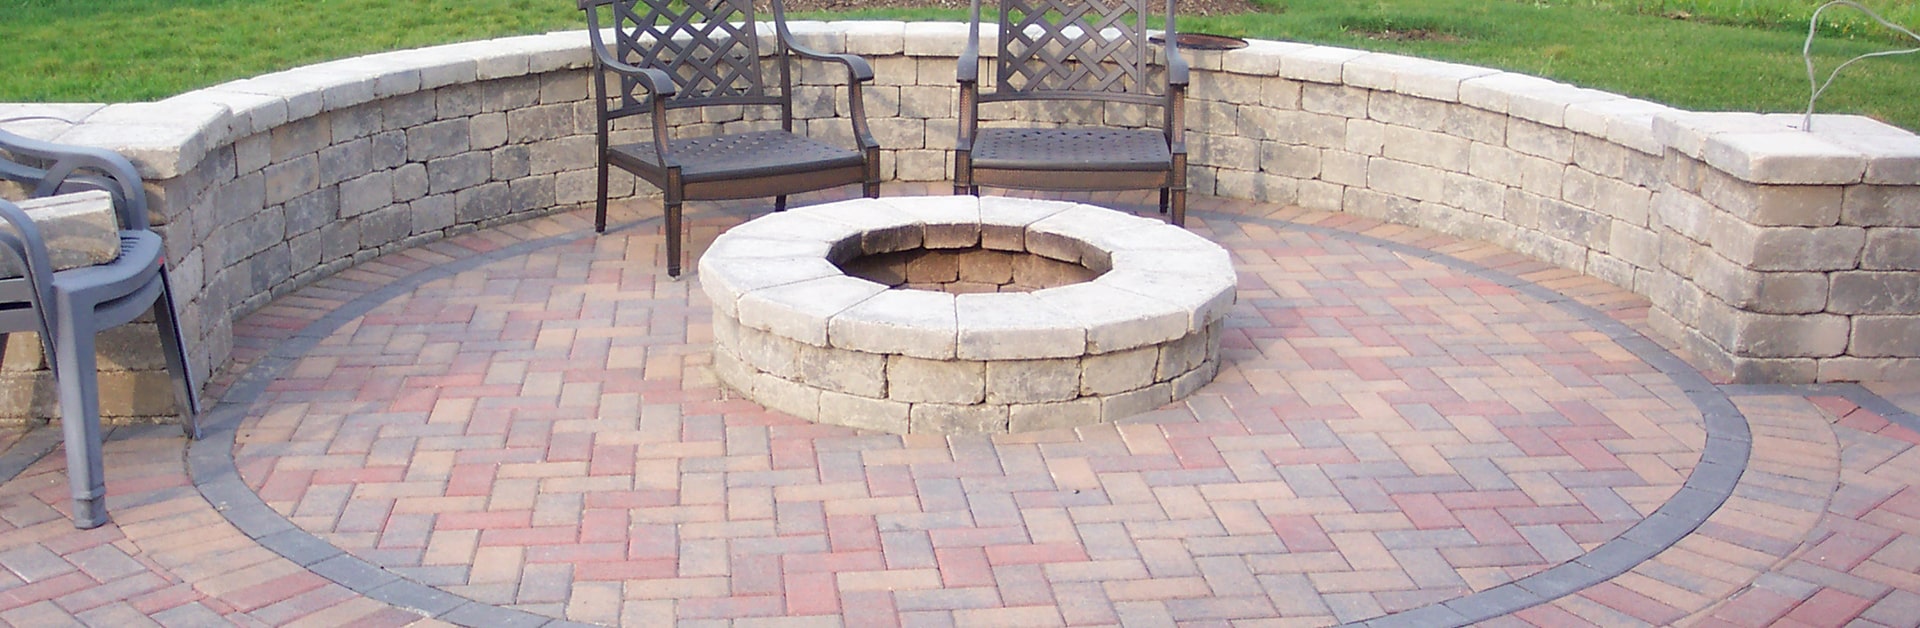 Fire Pits Fireplaces, Outdoor Fire Pit San Diego